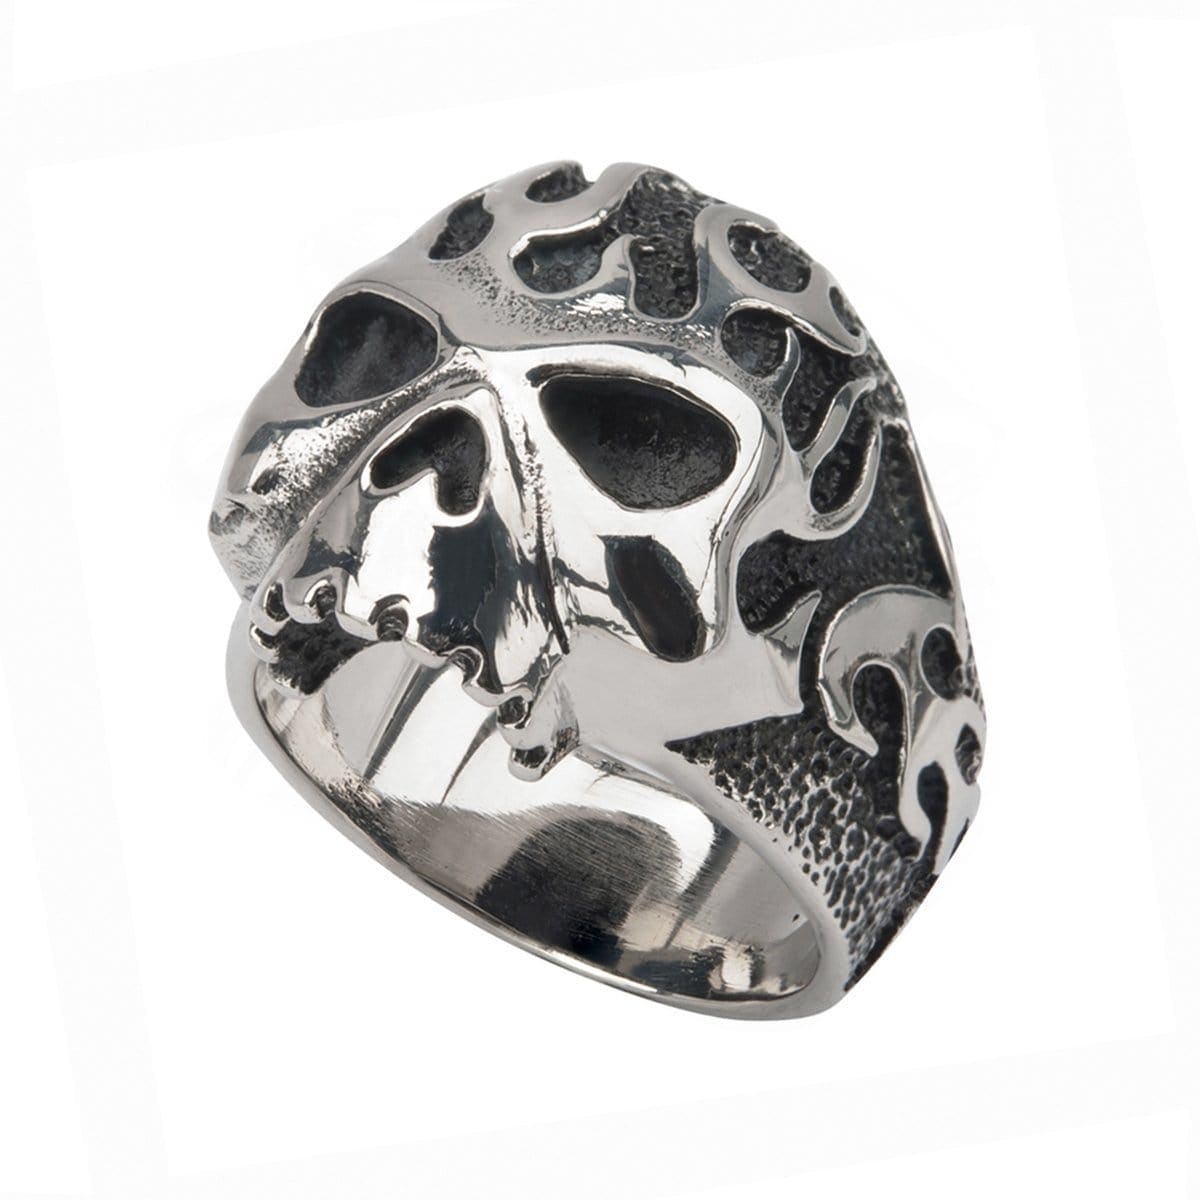 INOX JEWELRY Rings Antiqued Silver Tone Stainless Steel Flaming Skull Ring